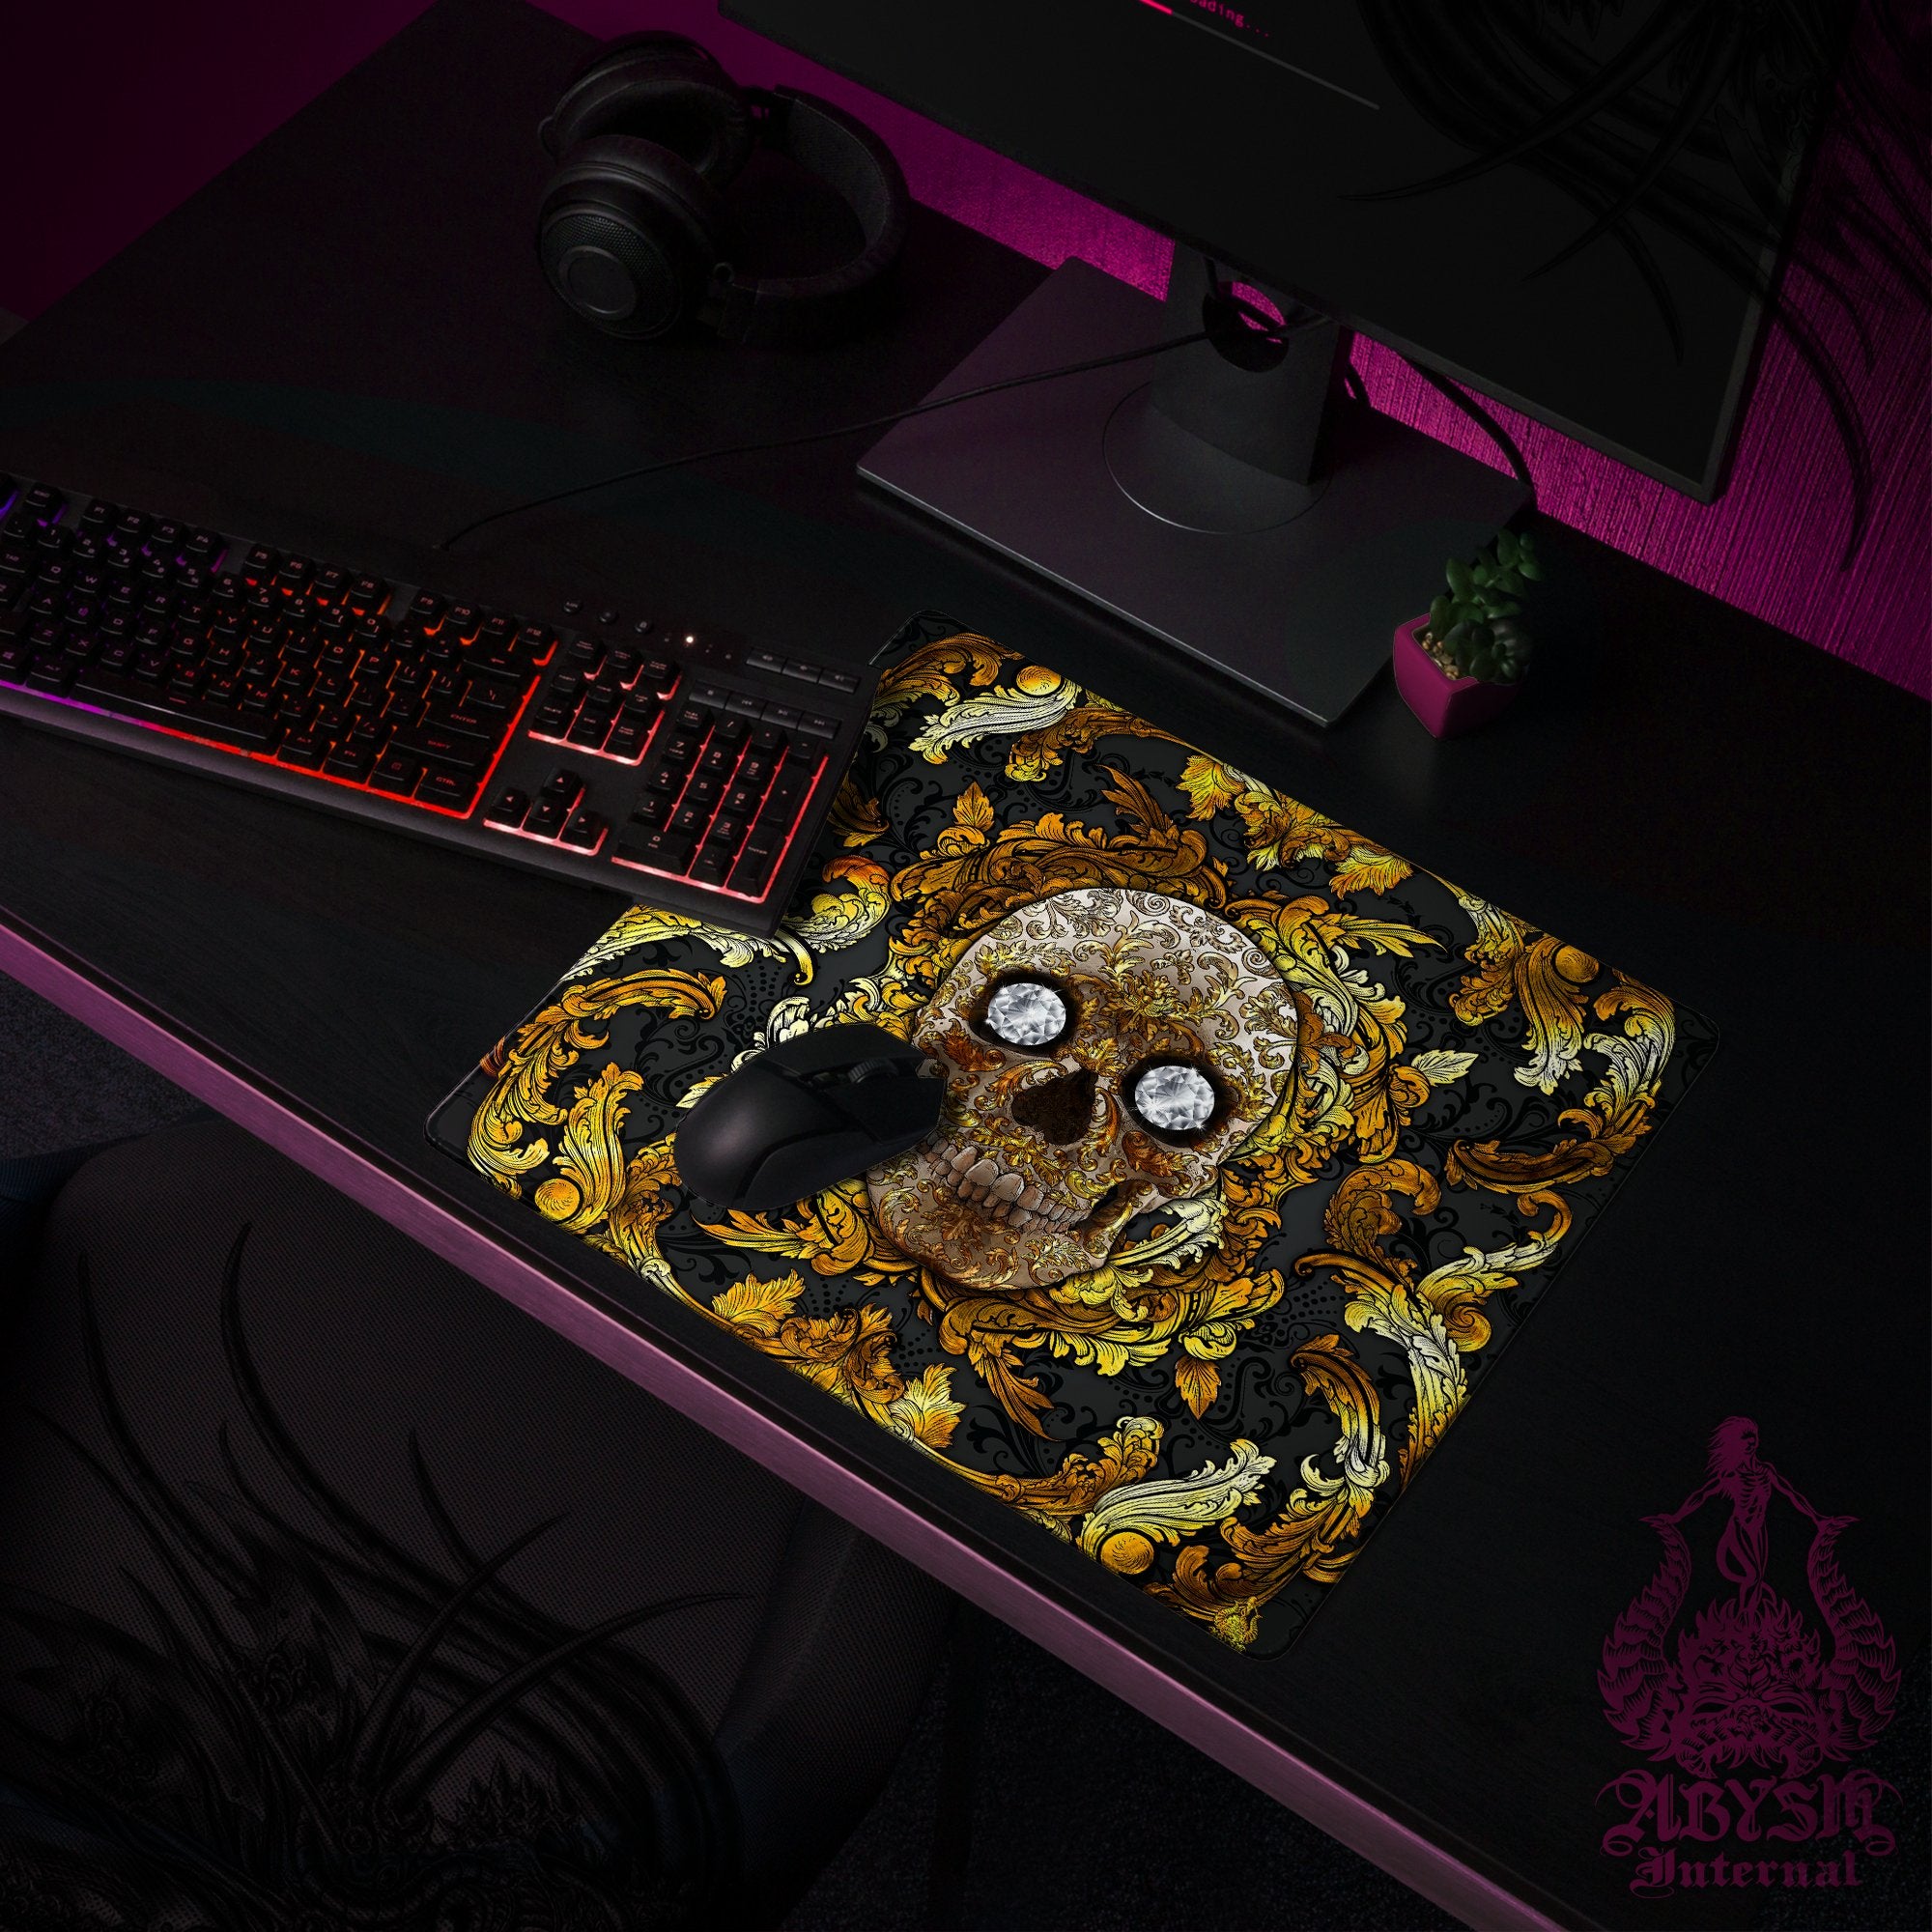 Gold Skull Workpad, Baroque Desk Mat, Ornamented Gaming Mouse Pad, Vintage Table Protector Cover, Art Print - Black - Abysm Internal